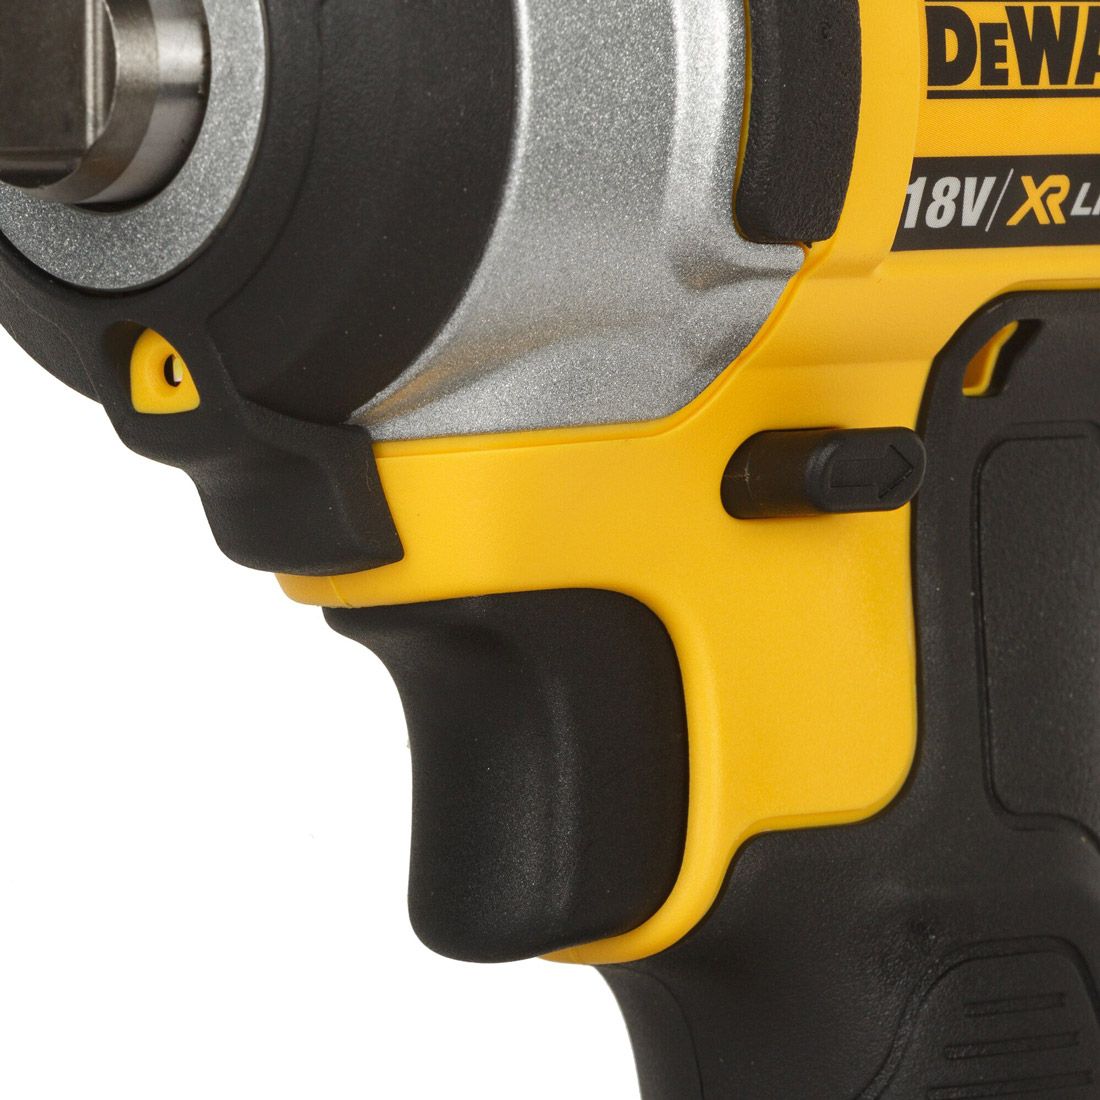 DeWalt DCK2025P2T - 18V XR Brushless Compact Combi Drill + 18V XR Compact Impact Wrench Kit with 2 x 18V XR 5.0Ah Batteries in TSTAK Case